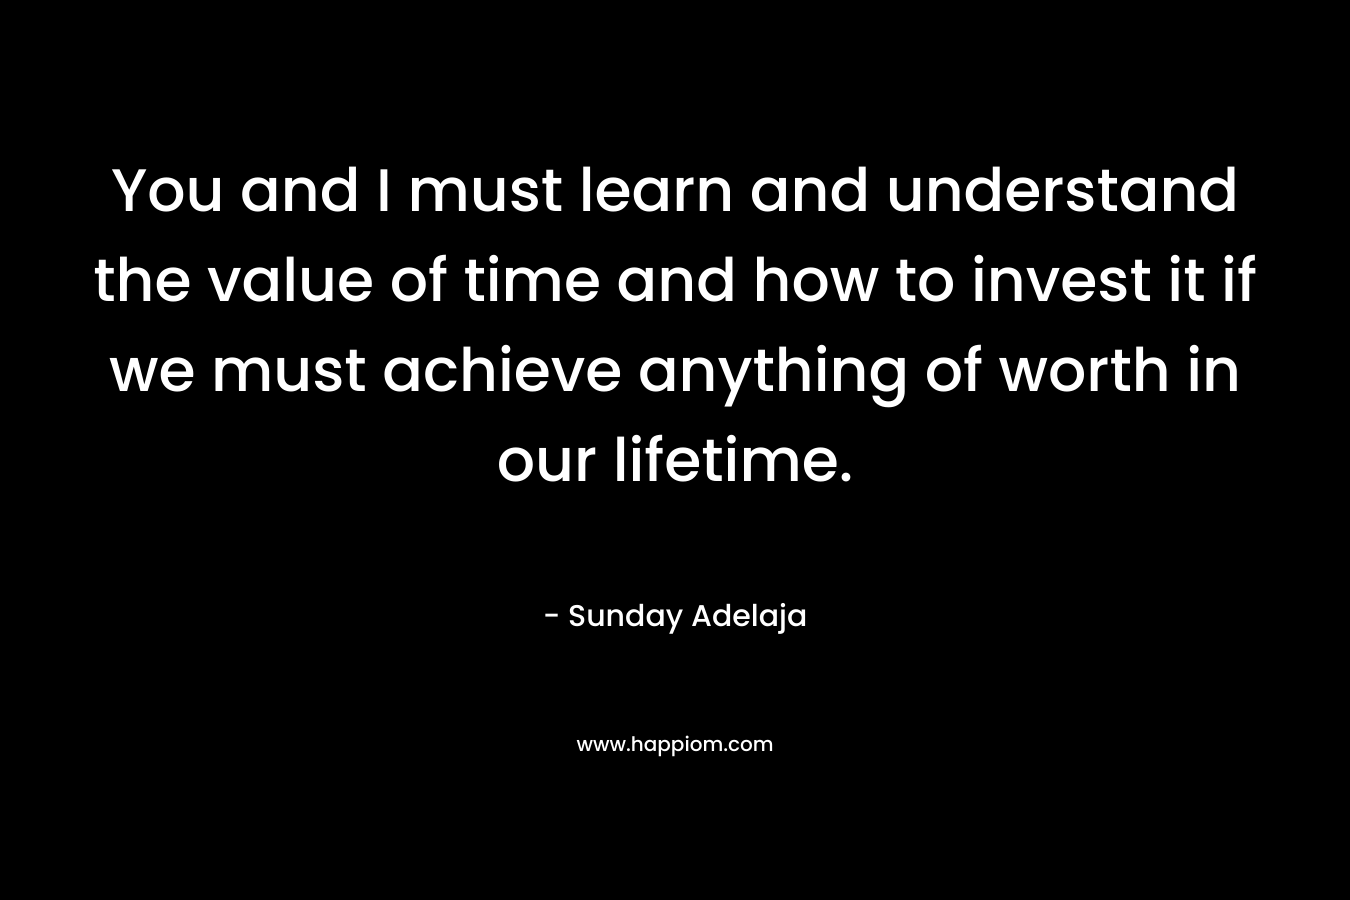 You and I must learn and understand the value of time and how to invest it if we must achieve anything of worth in our lifetime.